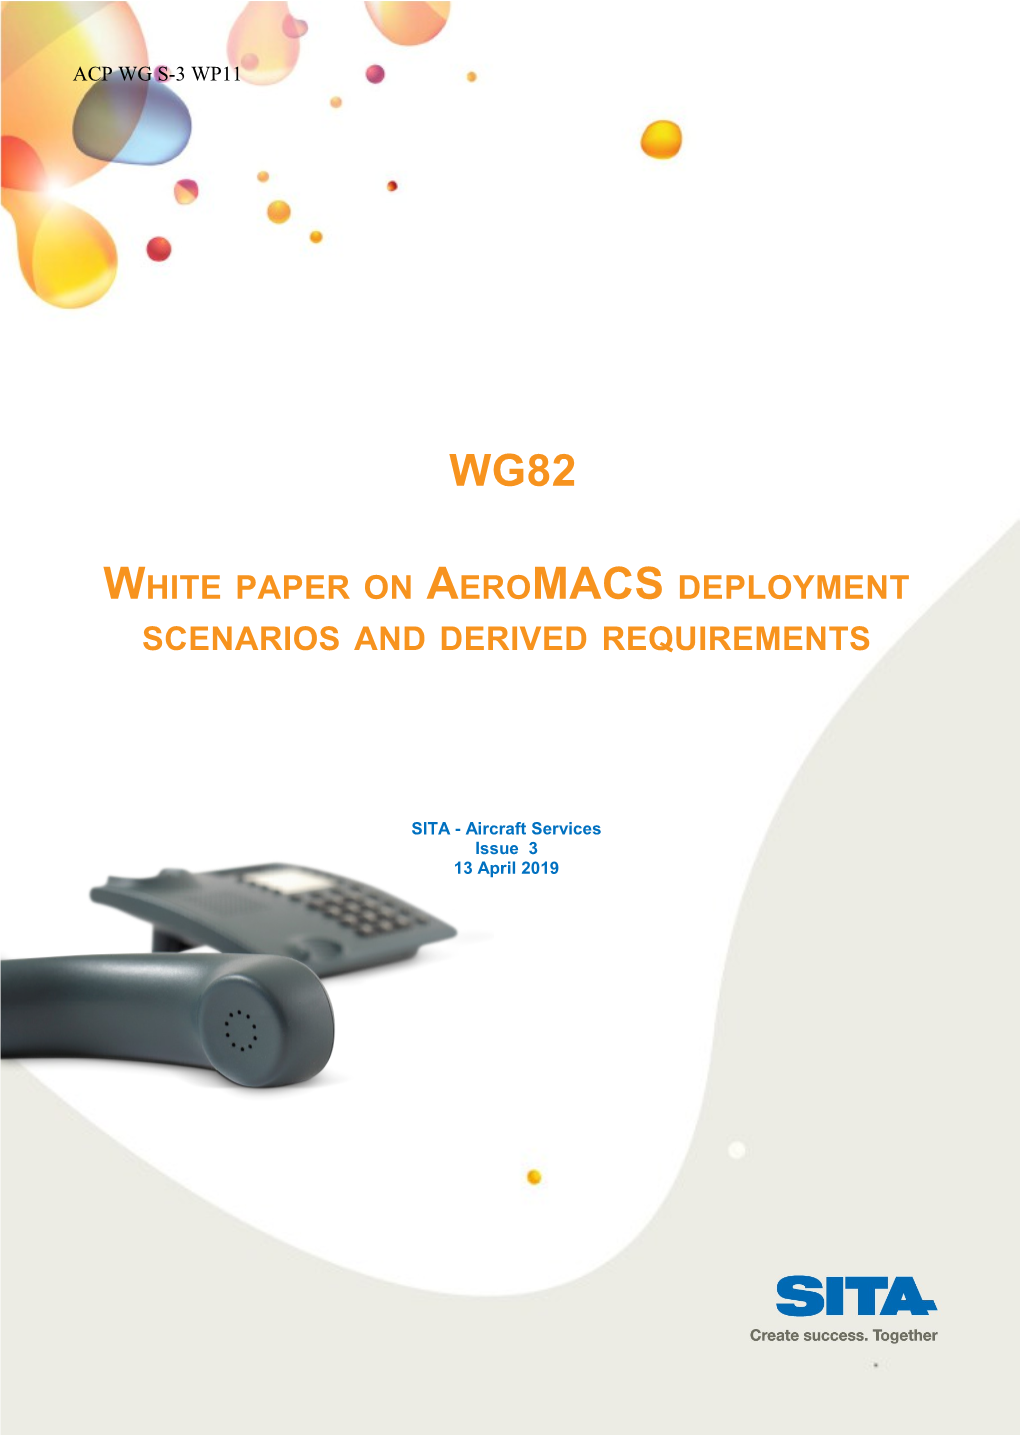 WP13 - WP11 White Paper on Aeromacs Deployment Models and Service Selection Process V3.1